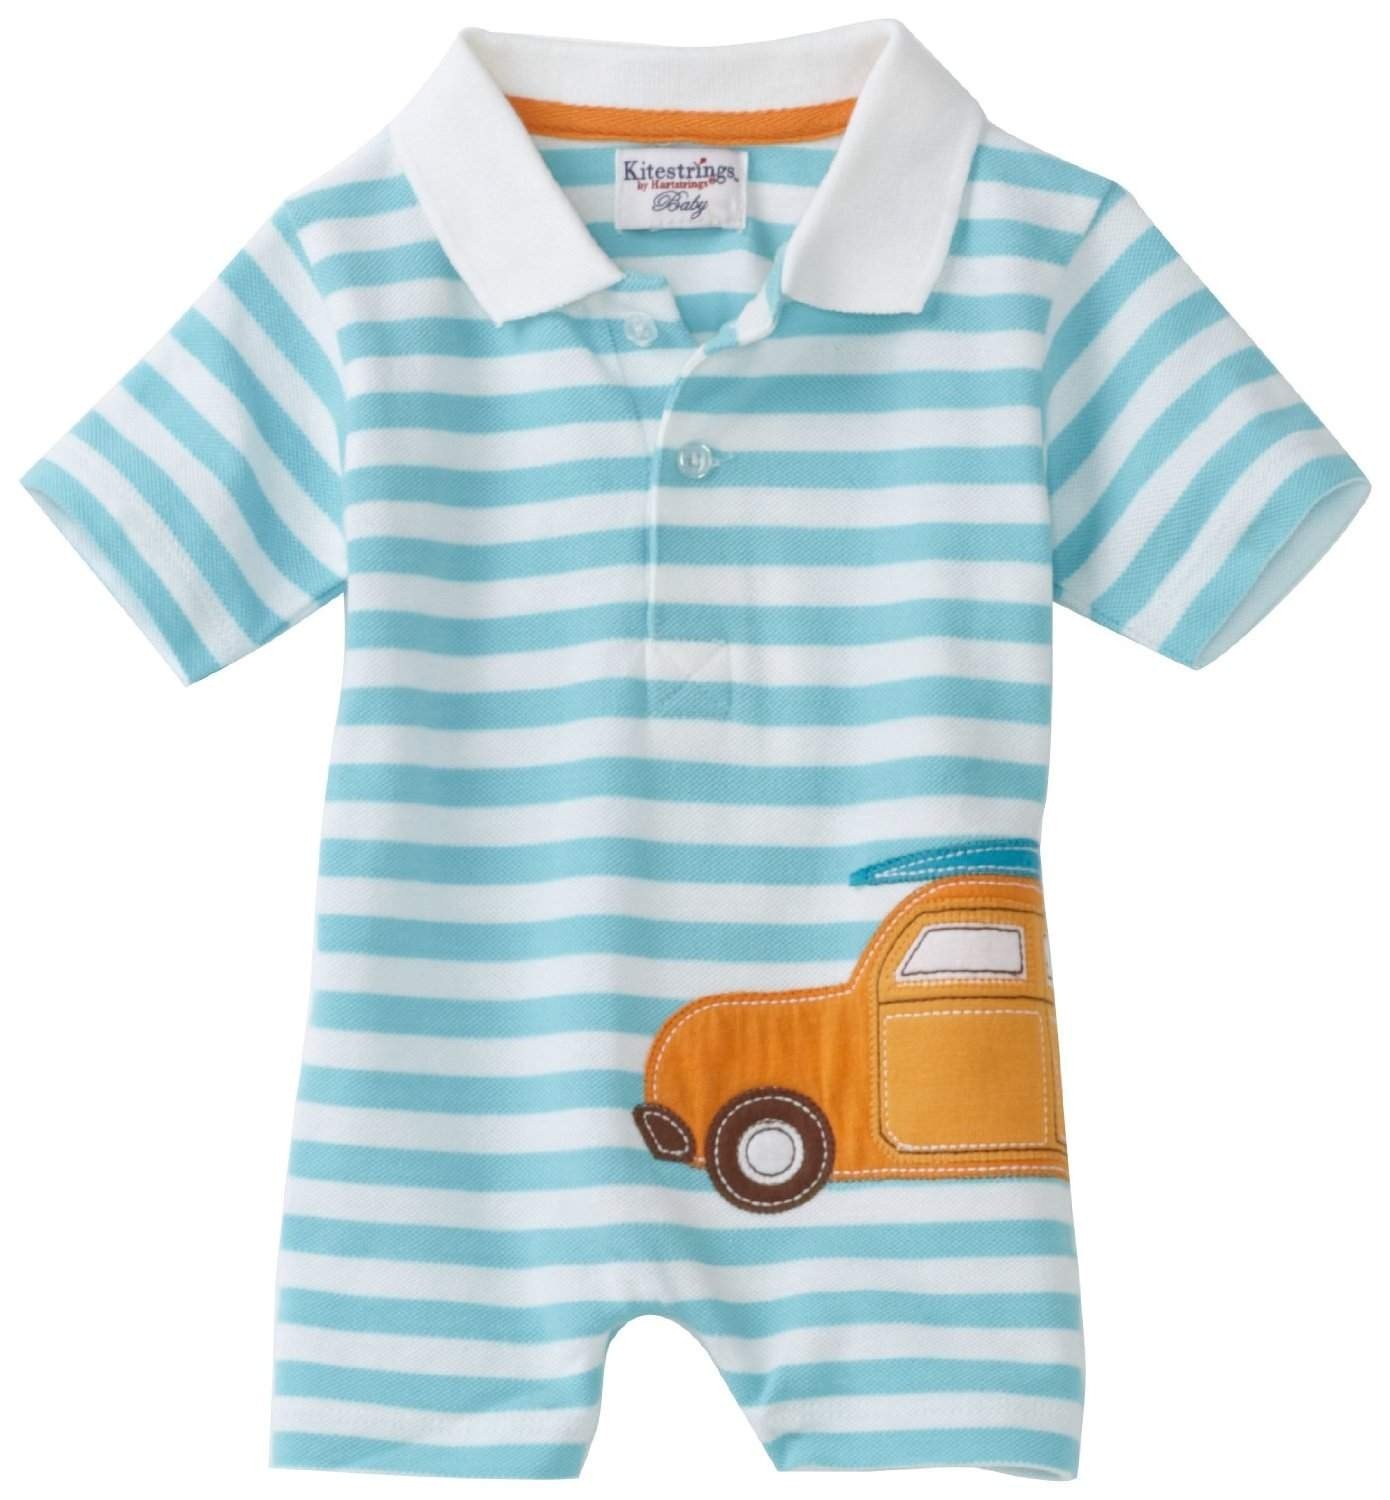 All Types of Newborn Baby Boy Clothes